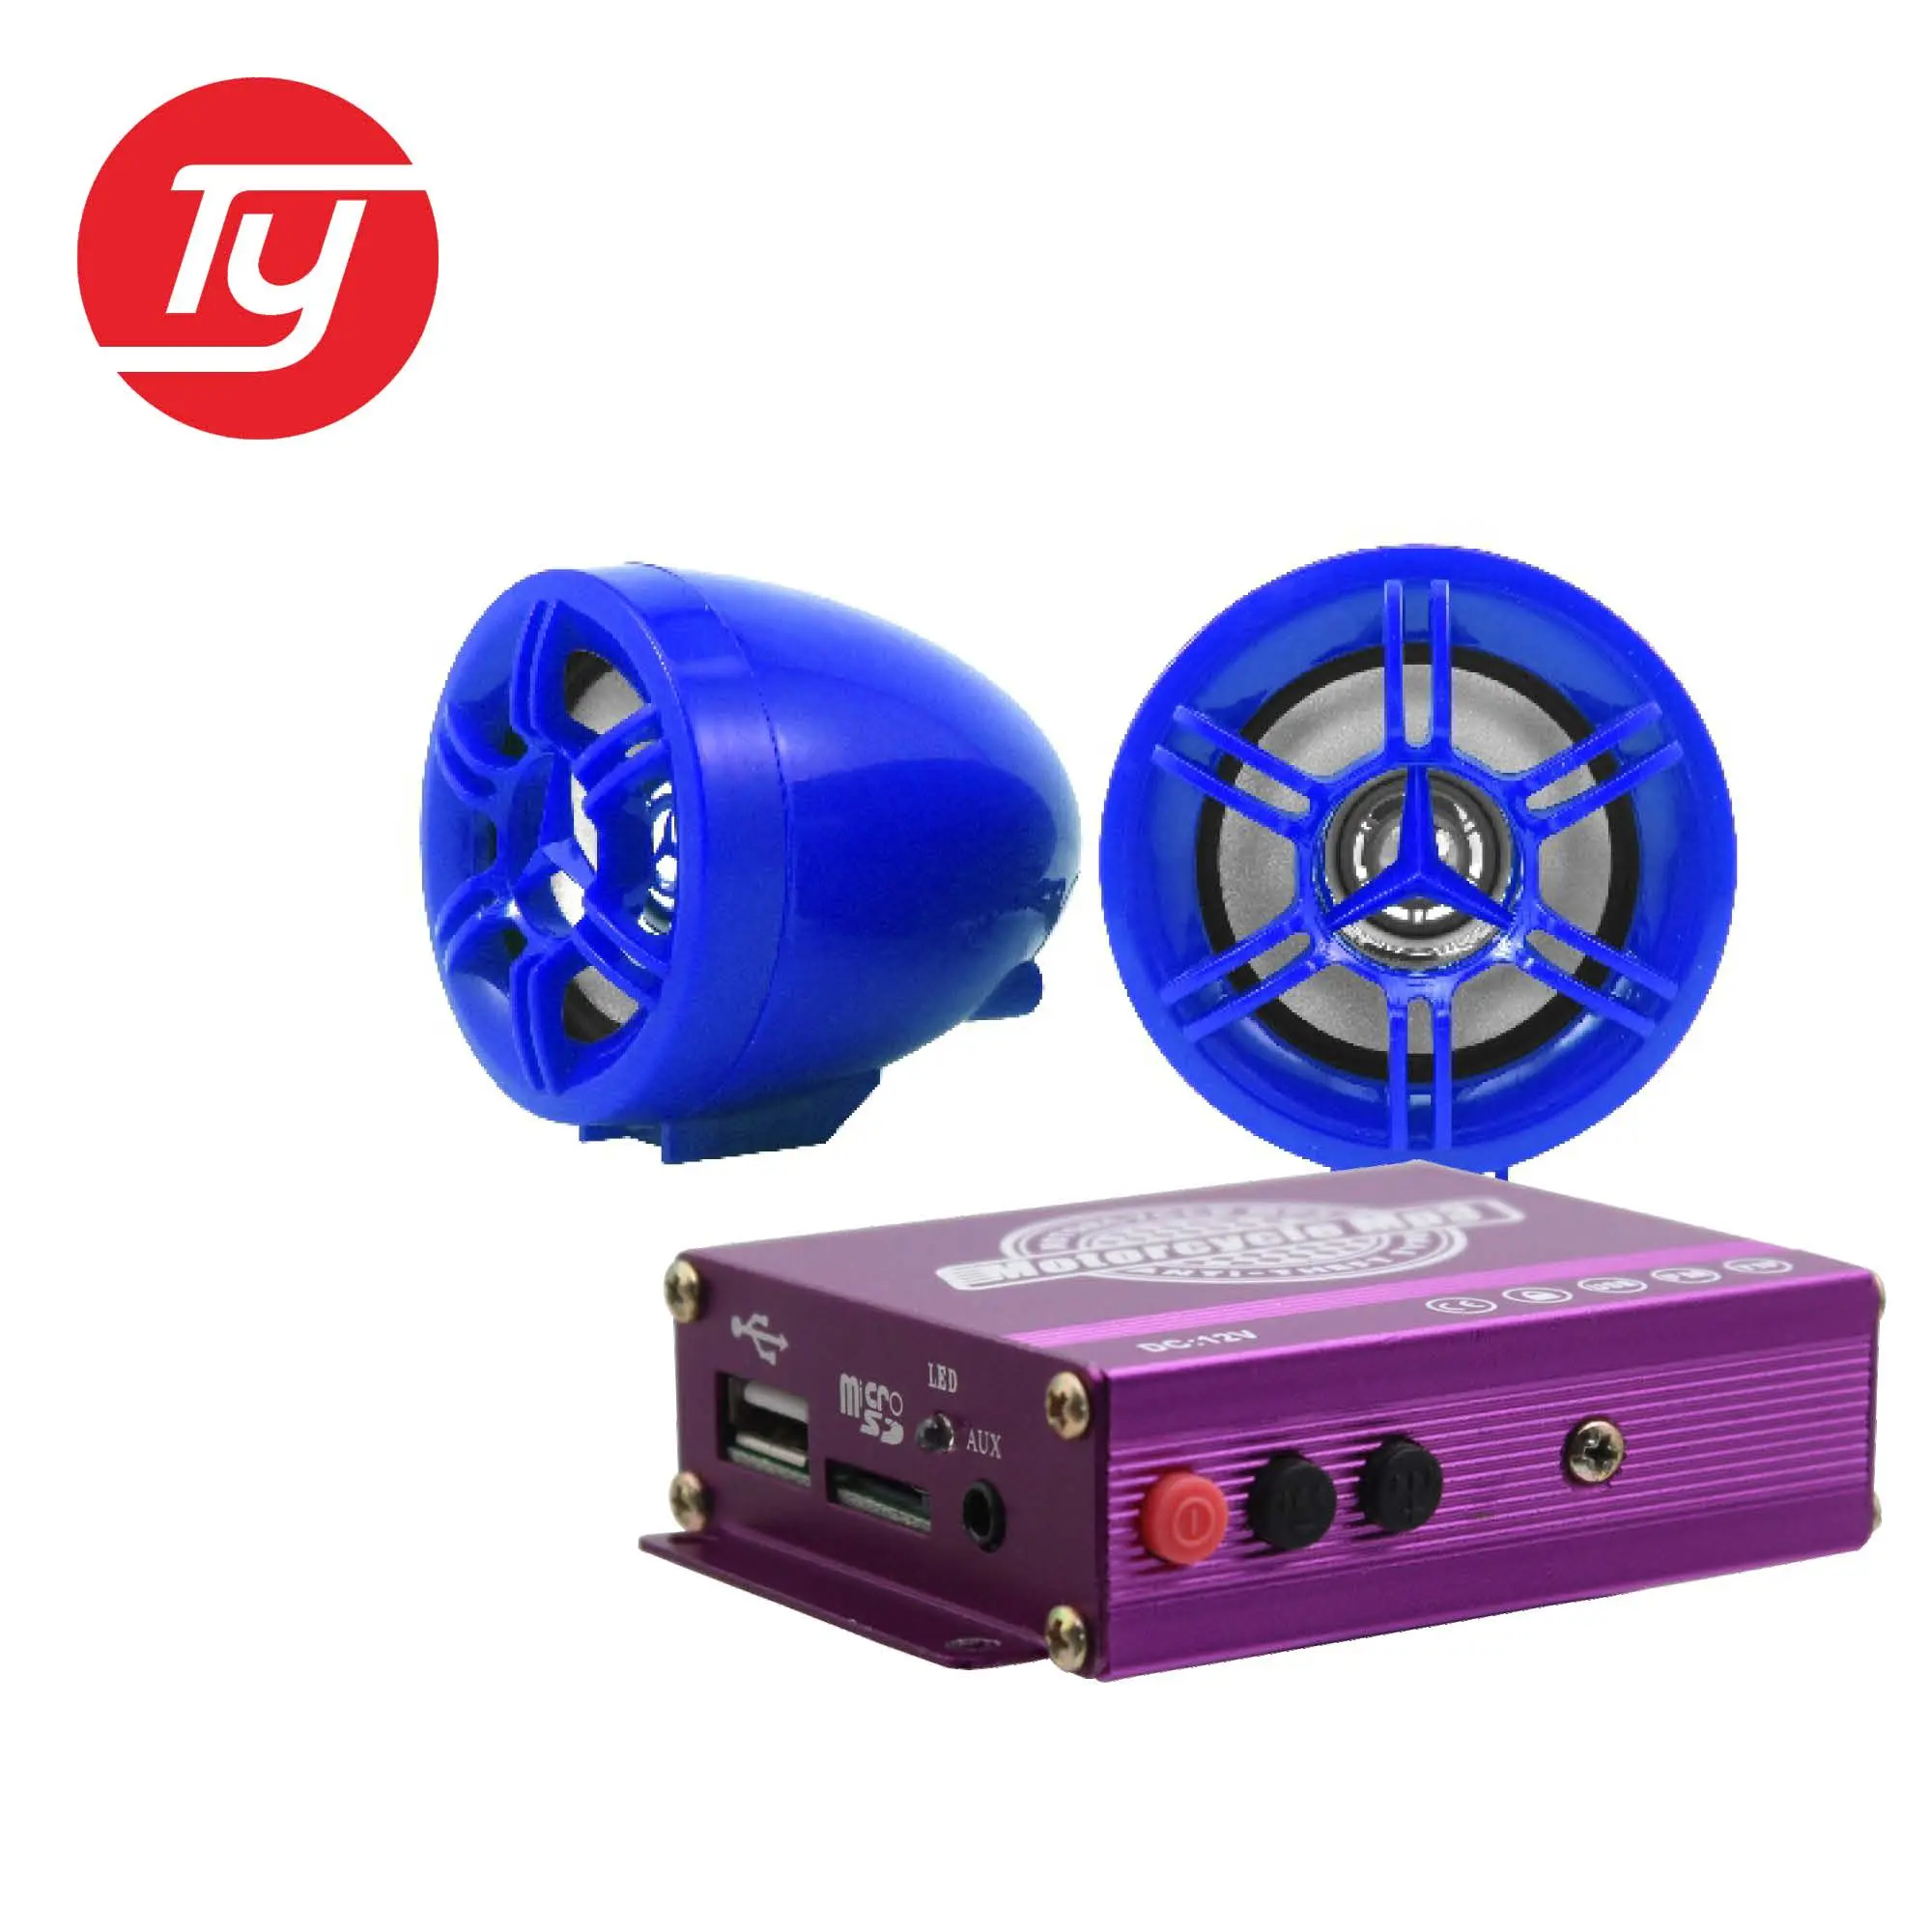 the lowest price motorcycle mp3 player with free download hidi music with bass treble speaker